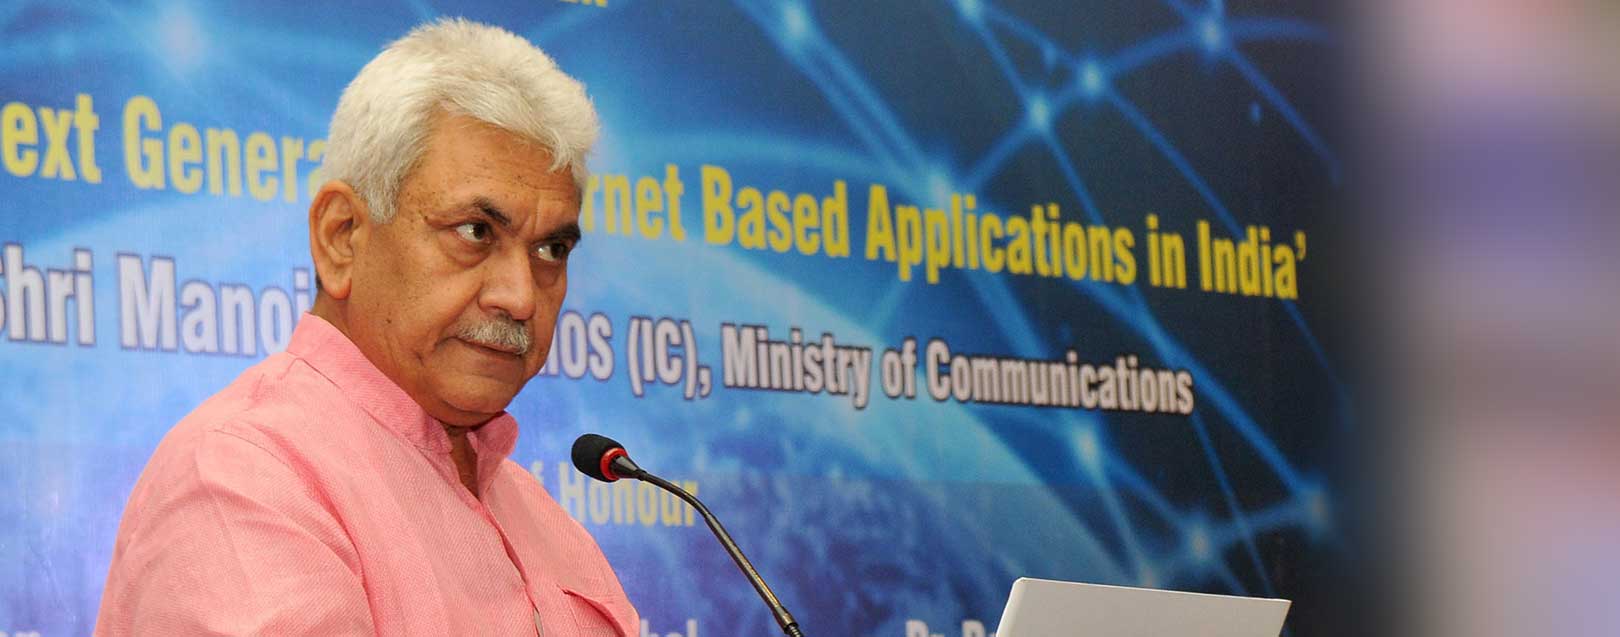 Indian Telecom Market is expected to cross the Rs 6.6 trillion revenue mark by 2020, Manoj Sinha